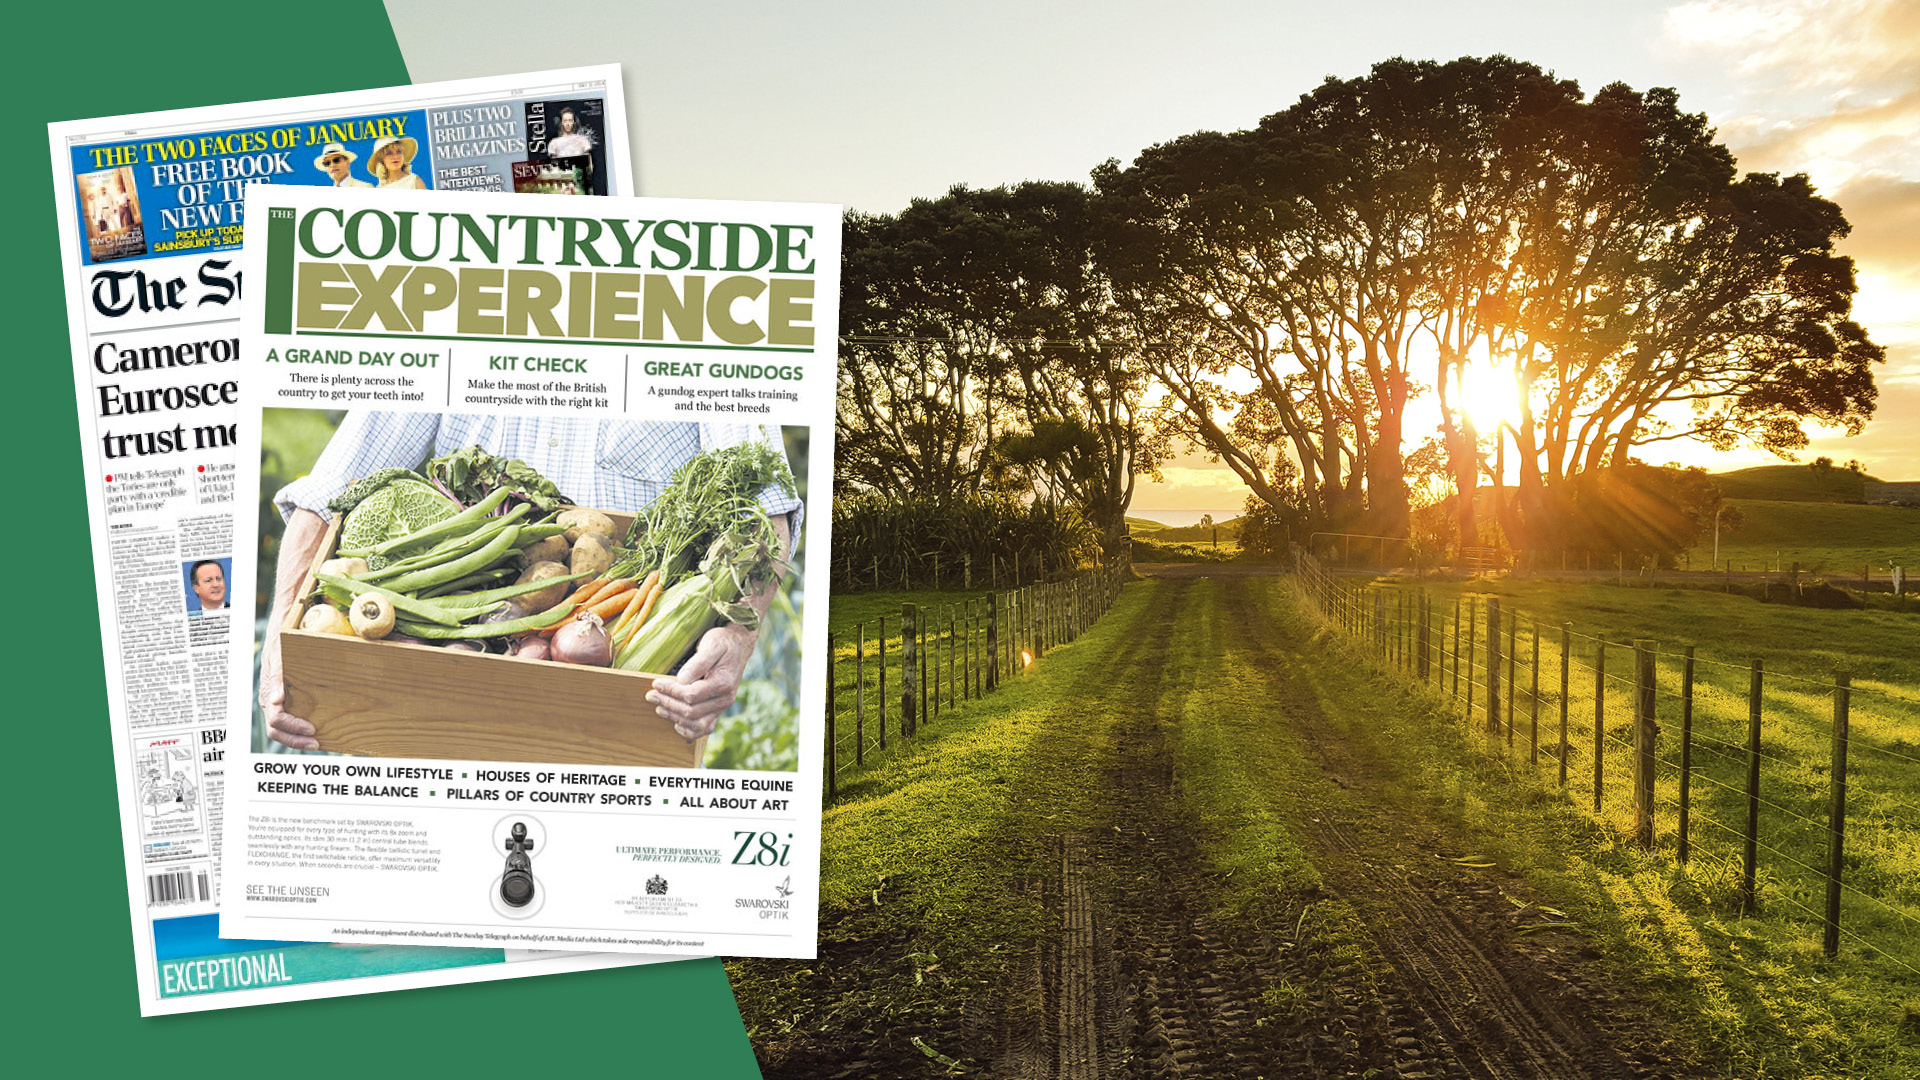 The Countryside Experience Distributed With The Sunday Telegraph